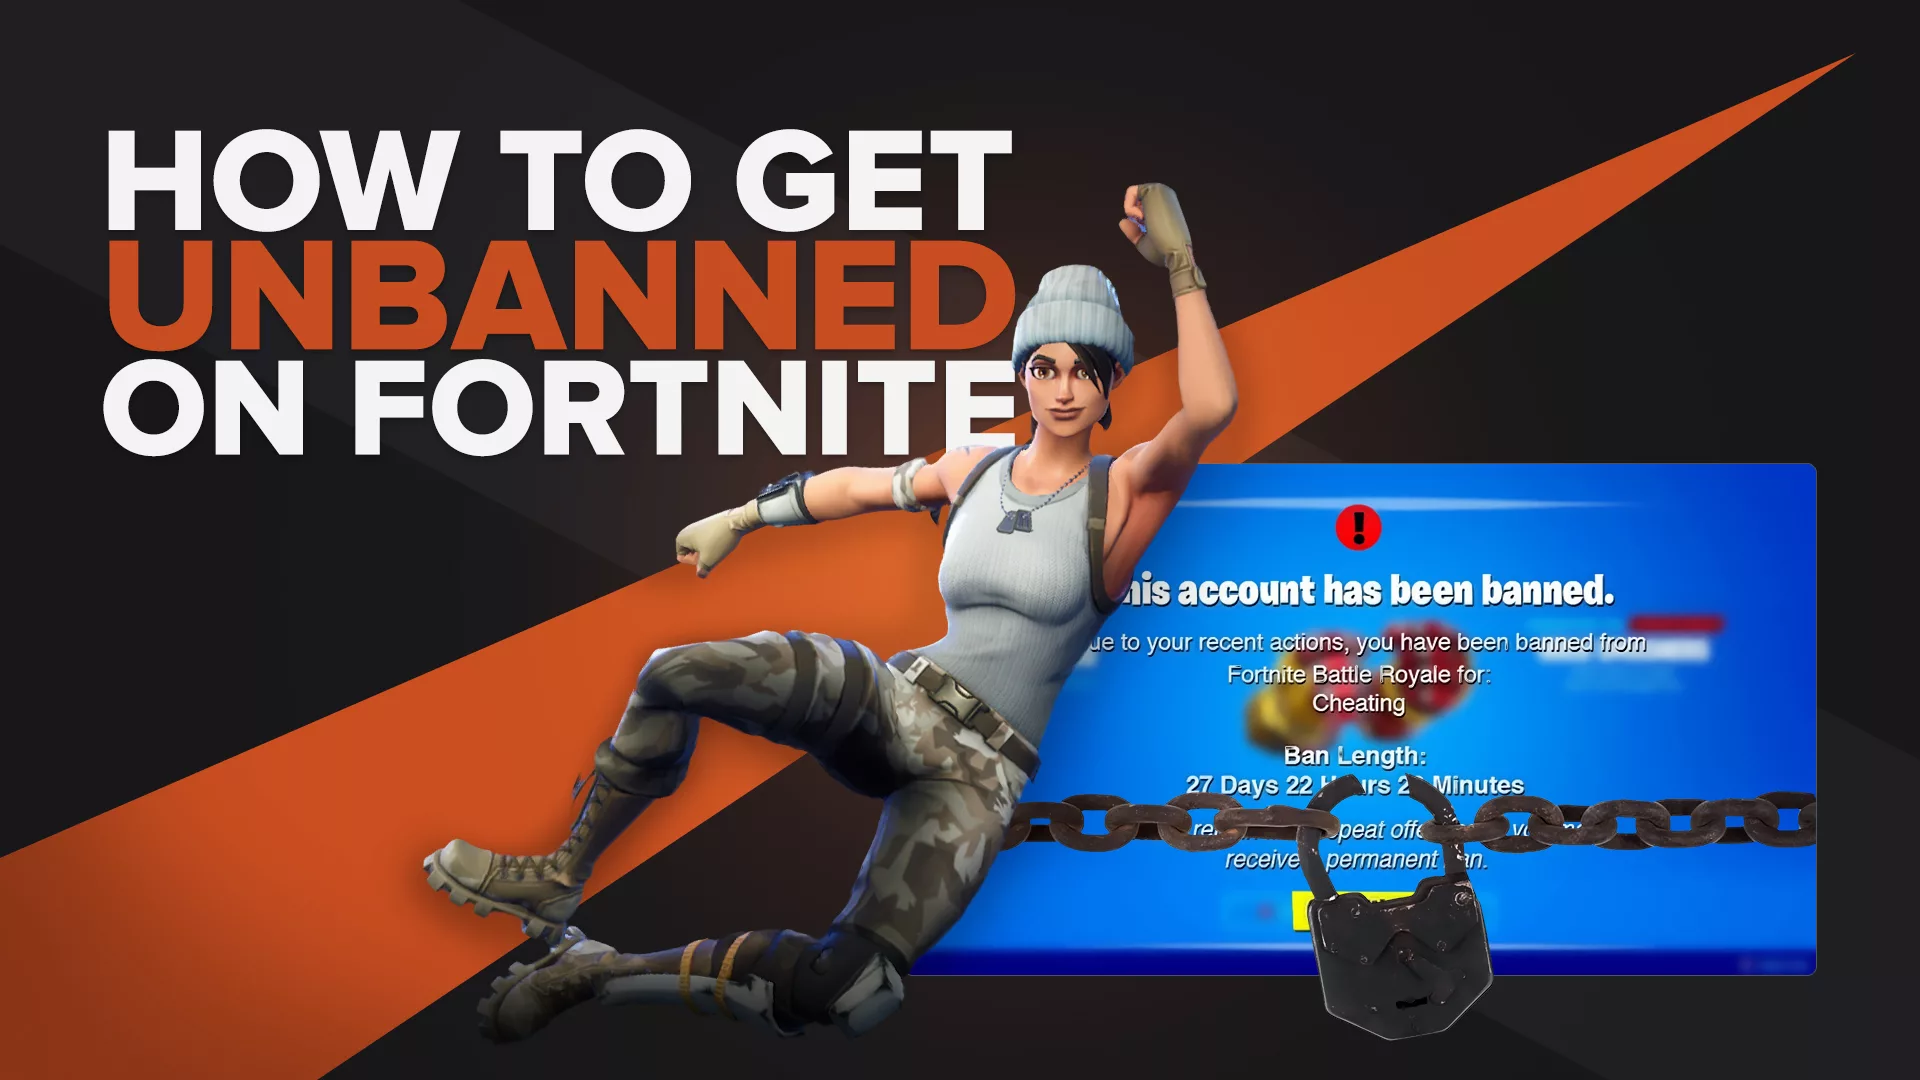 How To Get Unbanned on Fortnite